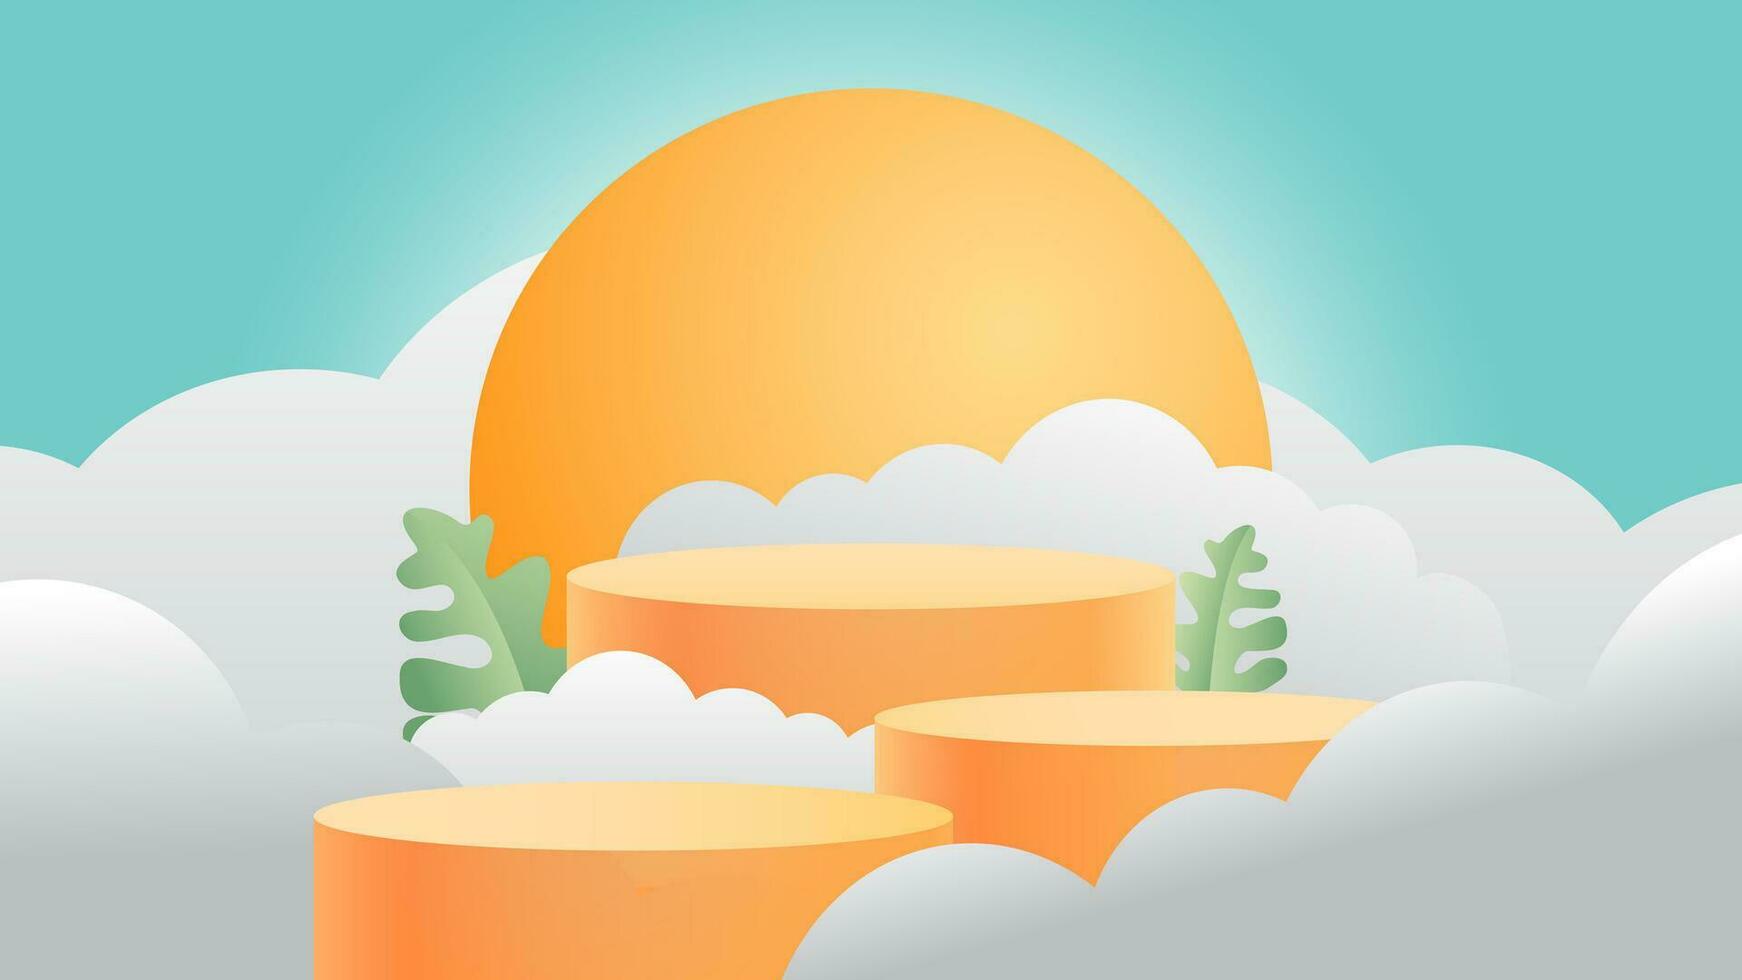 Enhance your products with a vibrant summer-themed display podium. Tropical design with sun, clouds, leaves, and a yellow cylinder podium against a sunny sky backdrop. vector